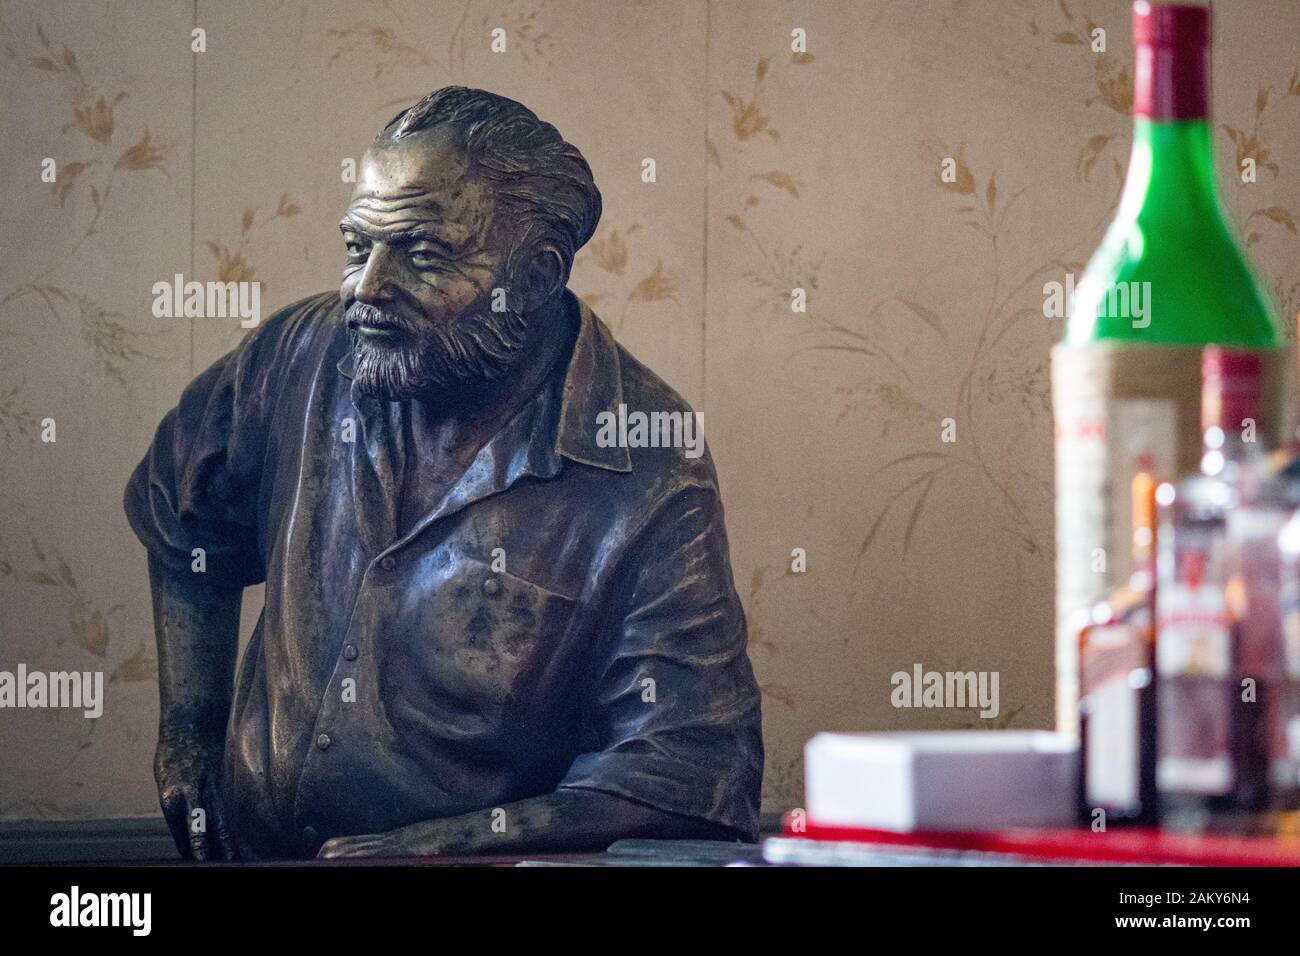 A life sized bronze statue of Ernest Hemingway stands at the bar in El Floridita , Havana, Cuba Stock Photo